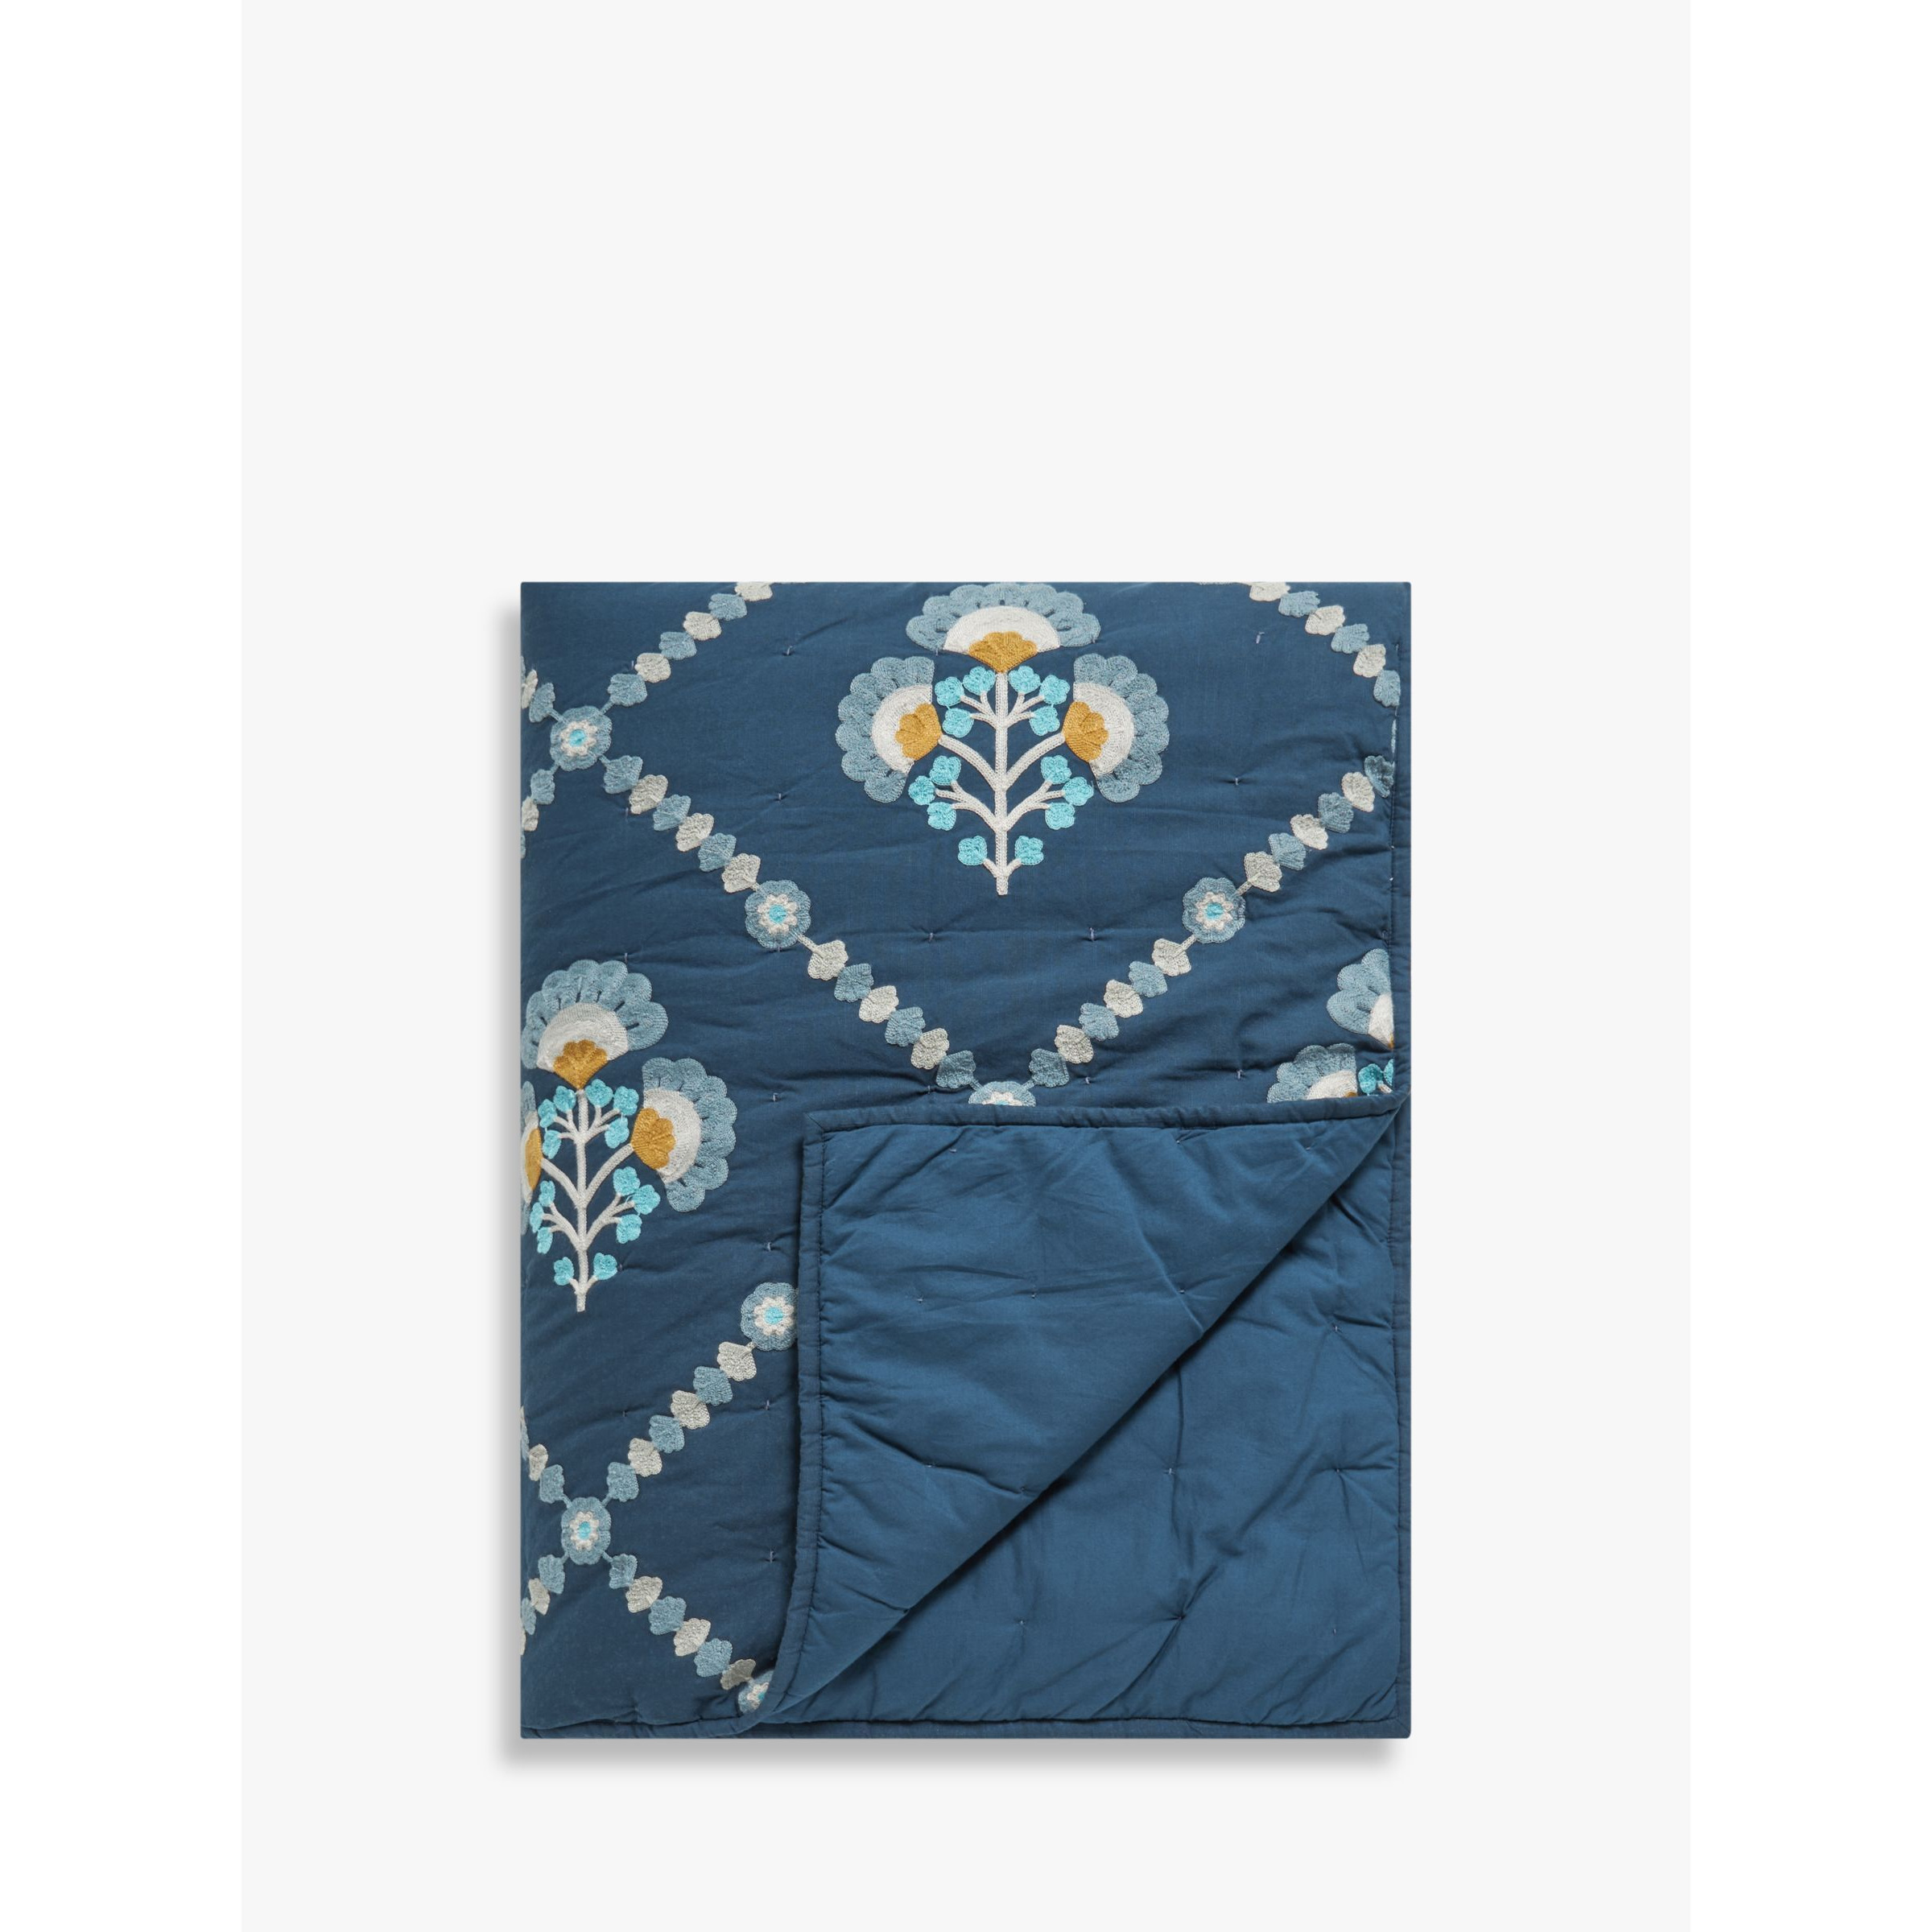 John Lewis Trellis Embroidery Quilted Bedspread, L220 x W220cm - image 1